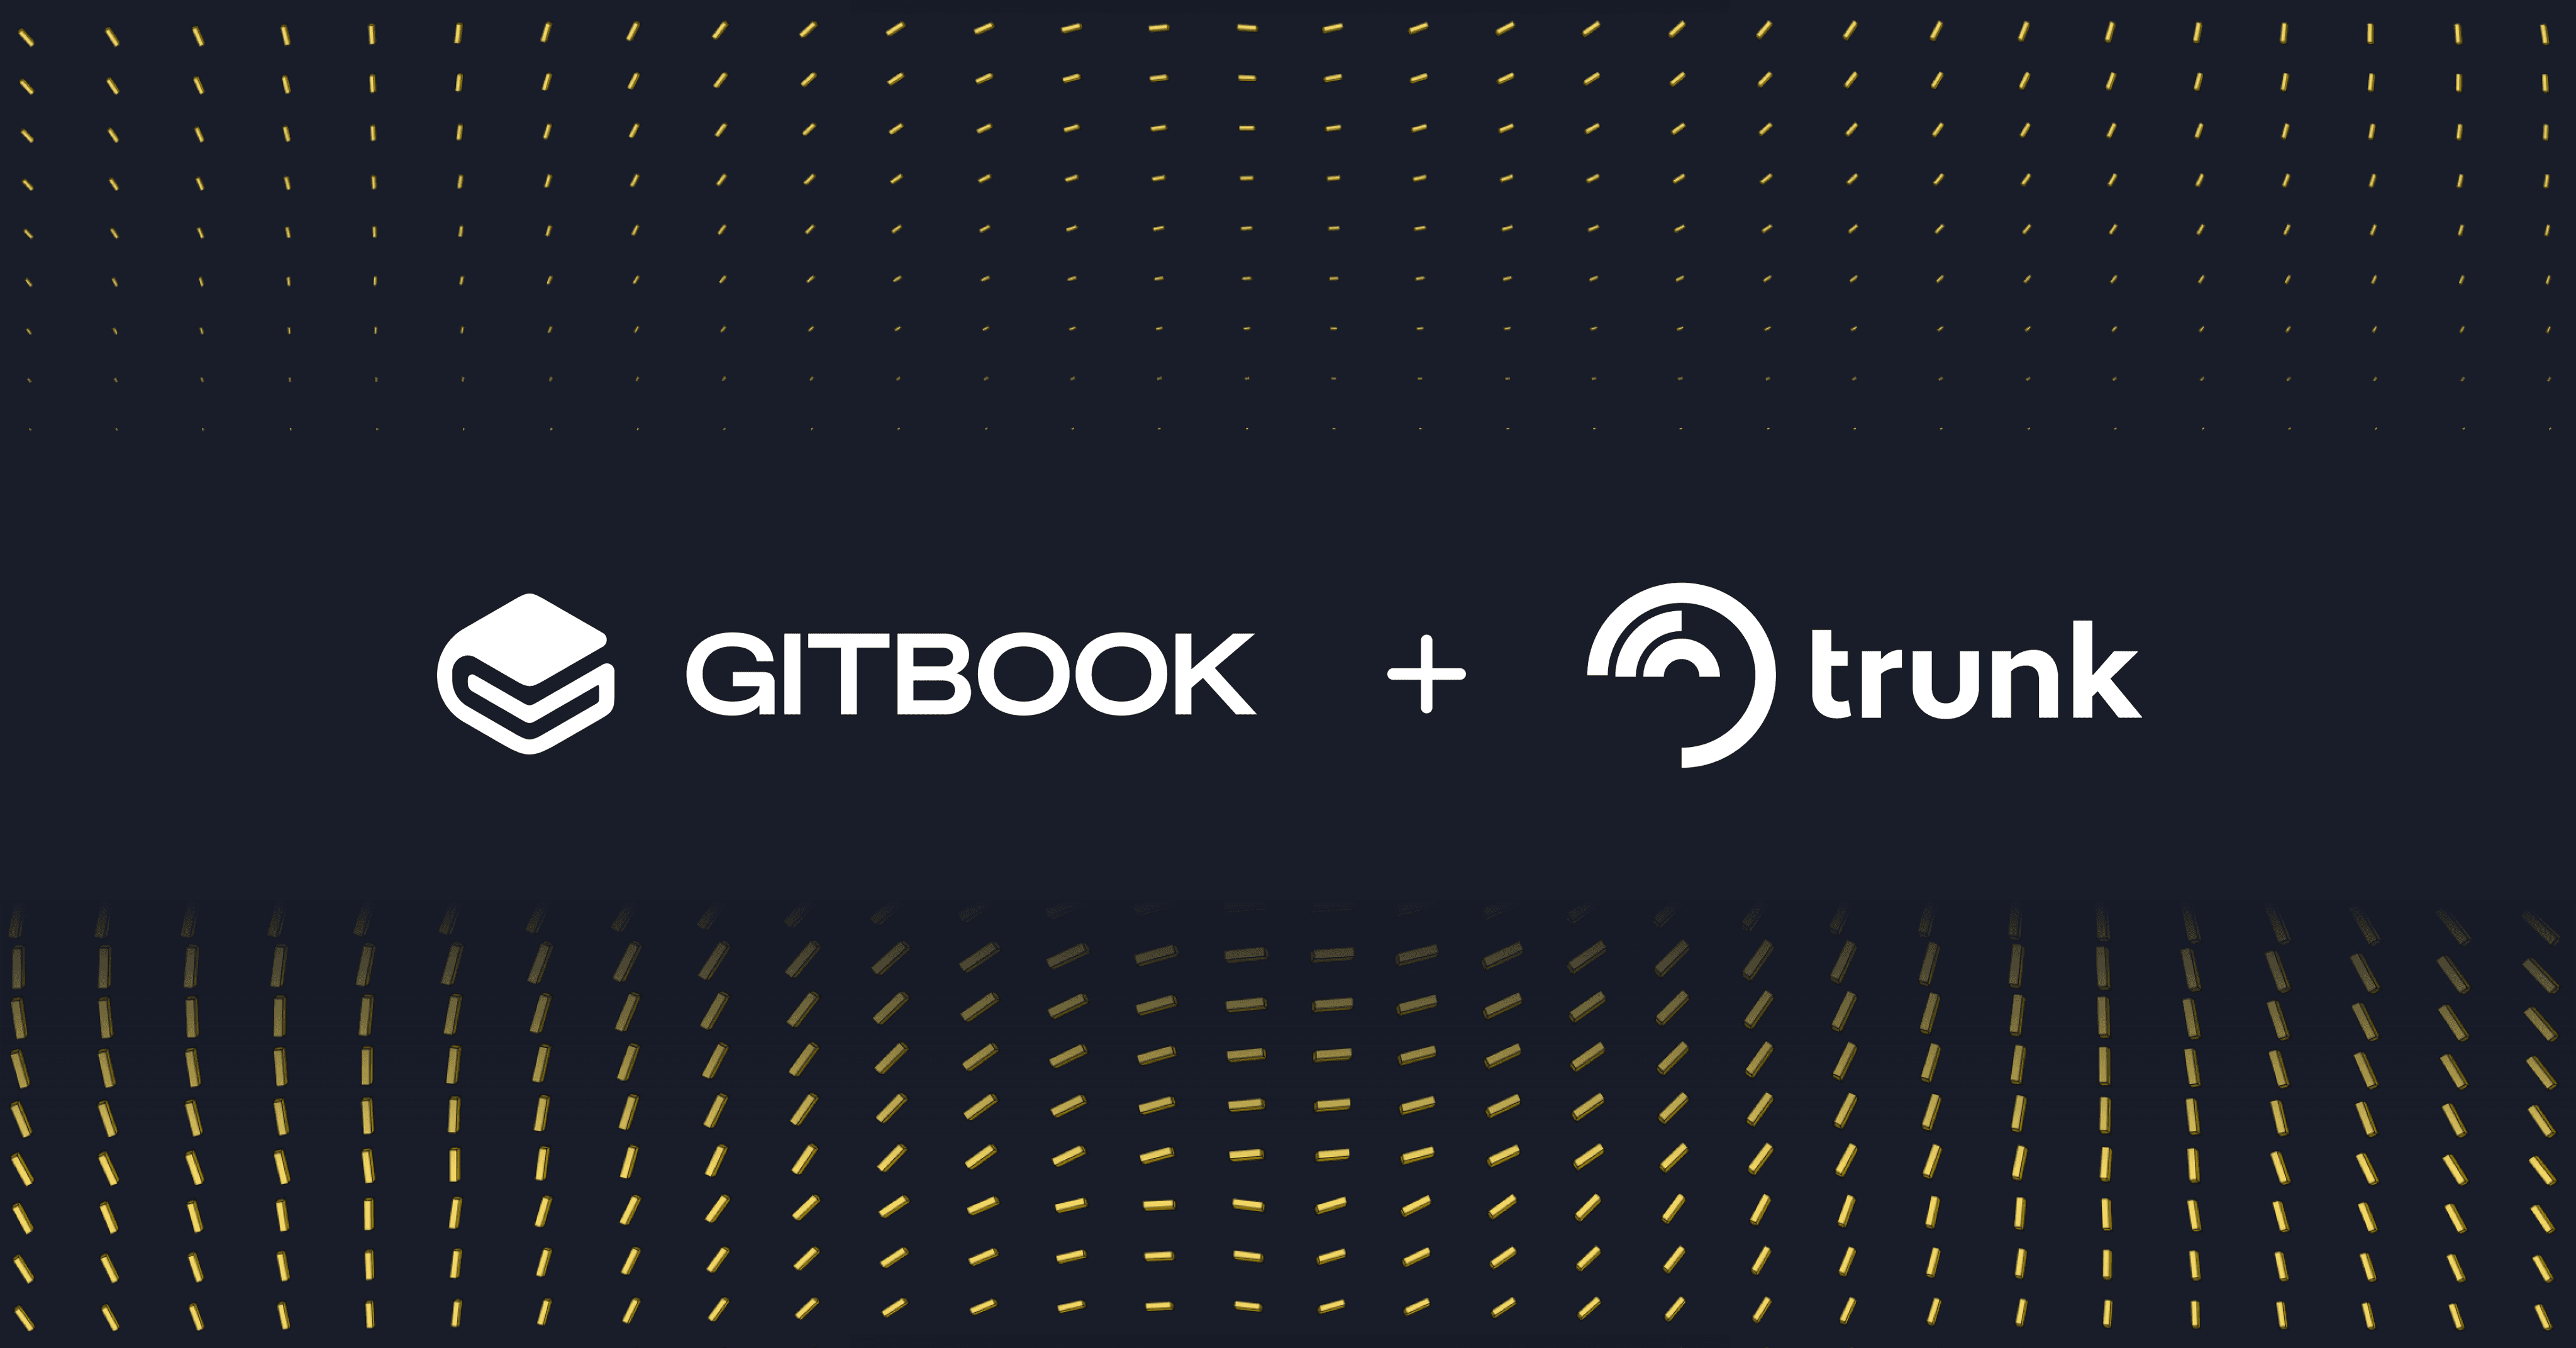 An illustration showing the GitBook and Trunk logos next to each other on a navy blue background that fades into a pattern of yellow shapes